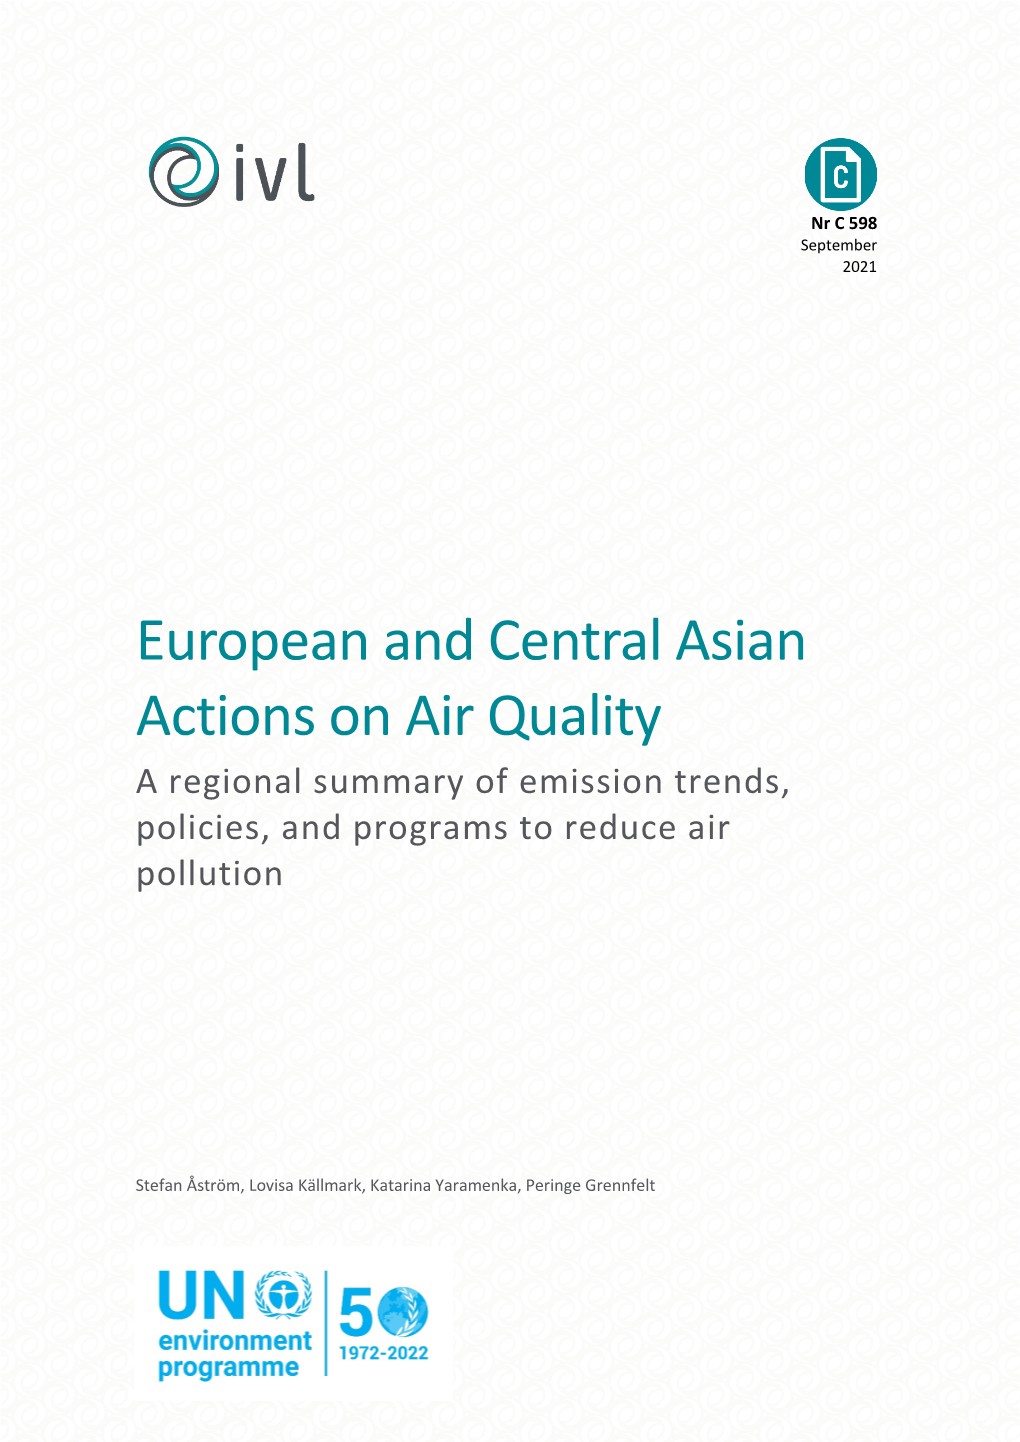 European and Central Asian Actions on Air Quality a Regional Summary of Emission Trends, Policies, and Programs to Reduce Air Pollution